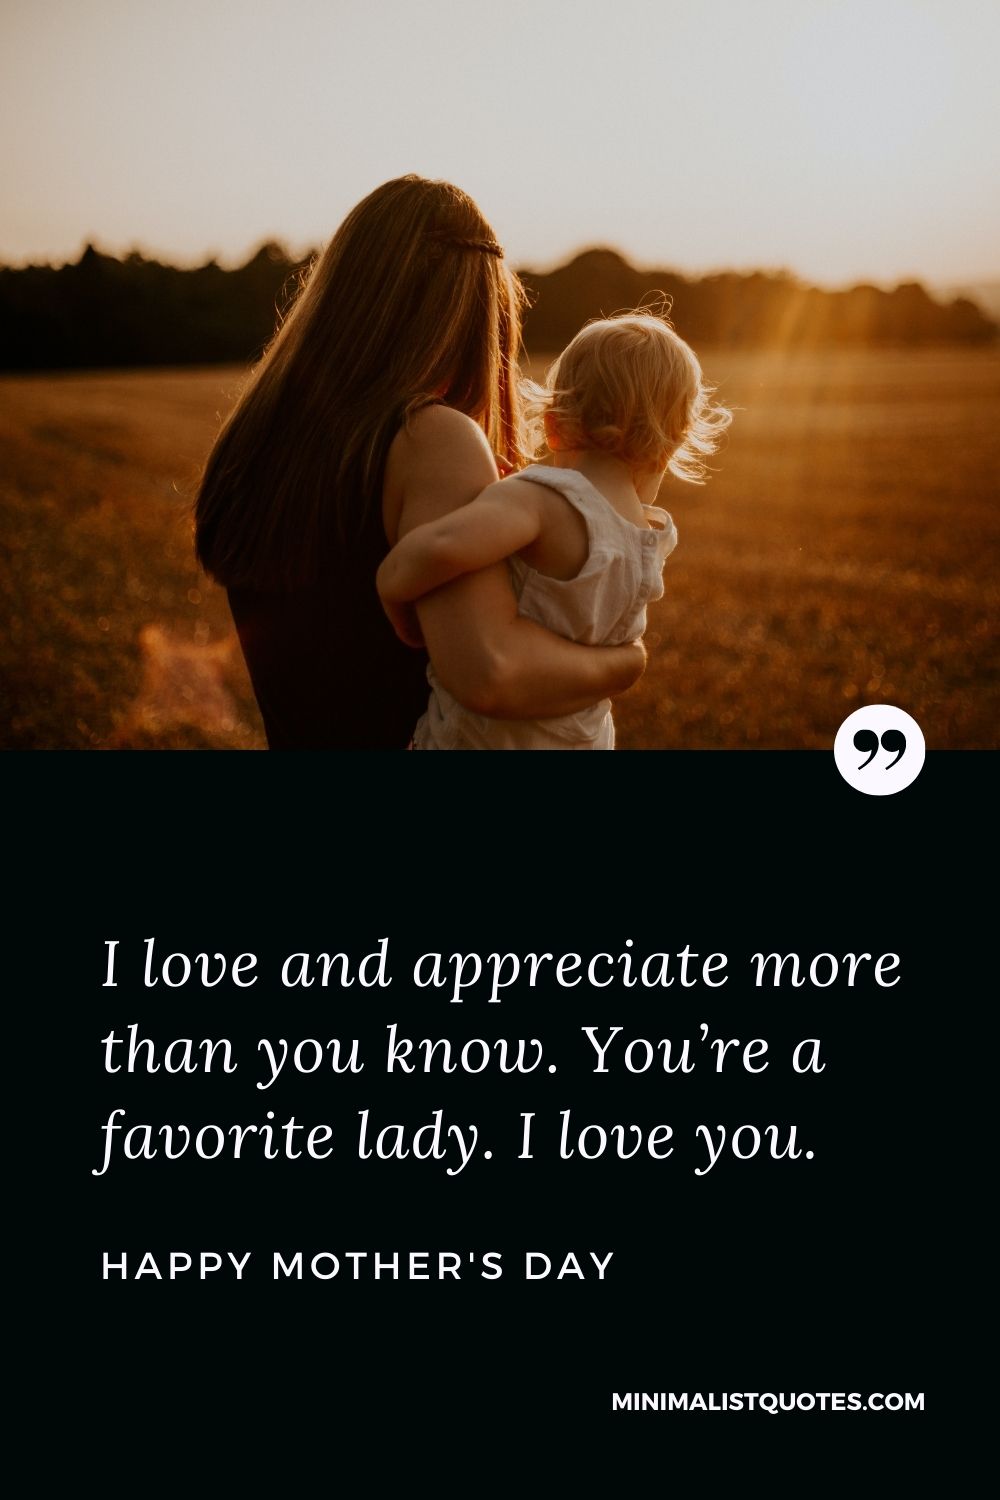 Mother's Day wish, quote & message with image: I love and appreciate more than you know. You’re a favorite lady. I love you. Happy Mother's Day!